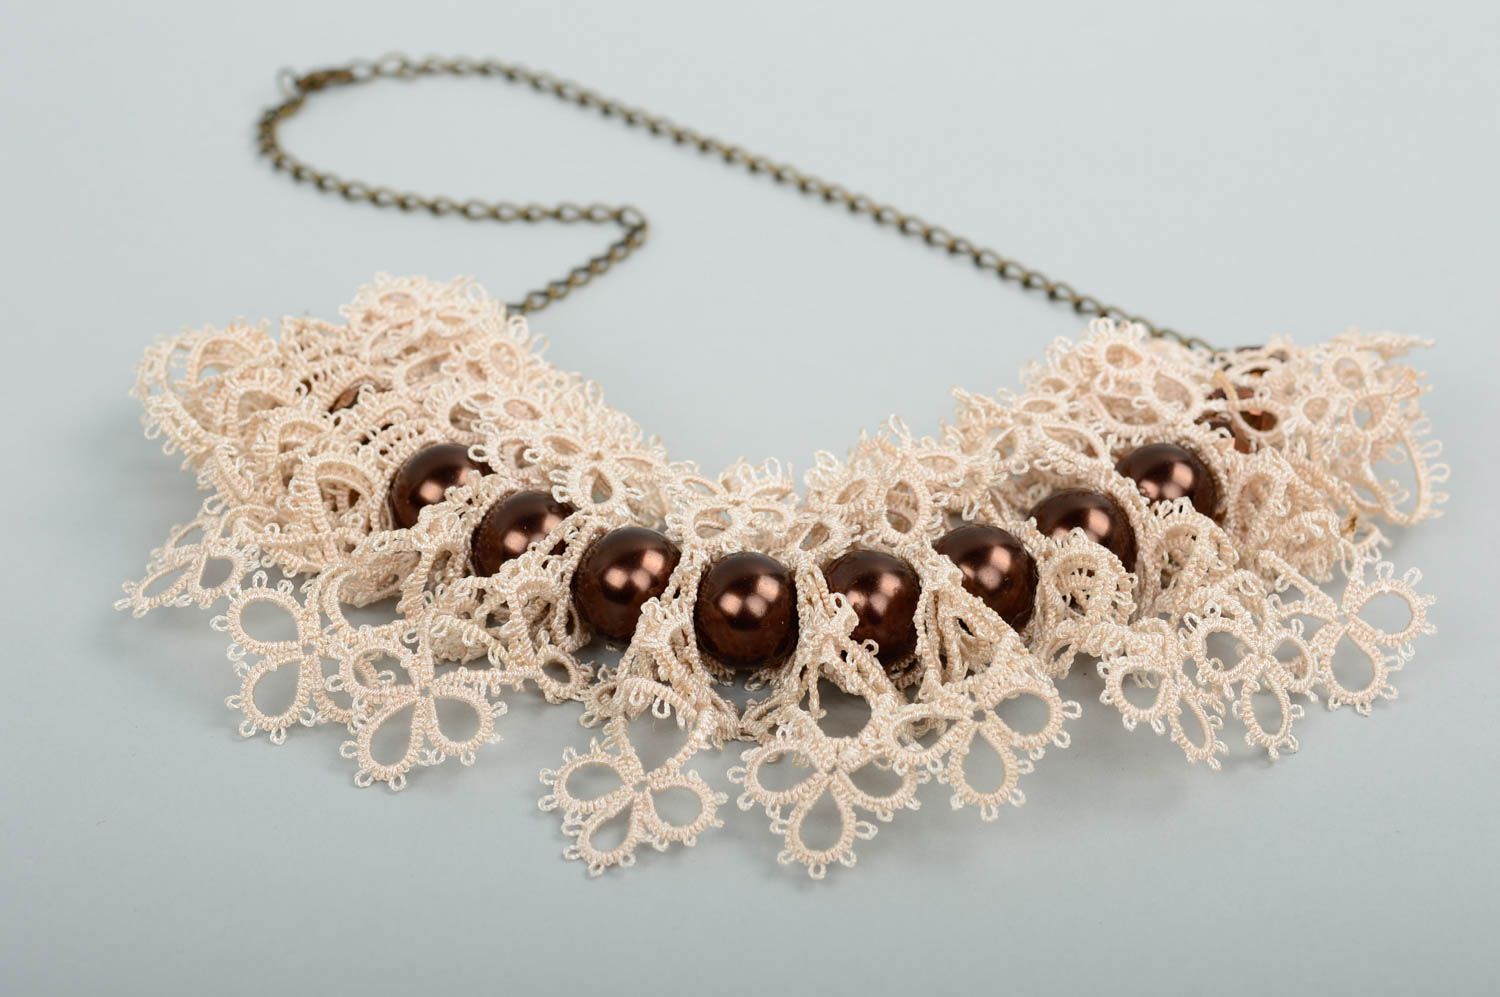 Unusual handmade woven lace necklace beaded necklace textile jewelry designs photo 2